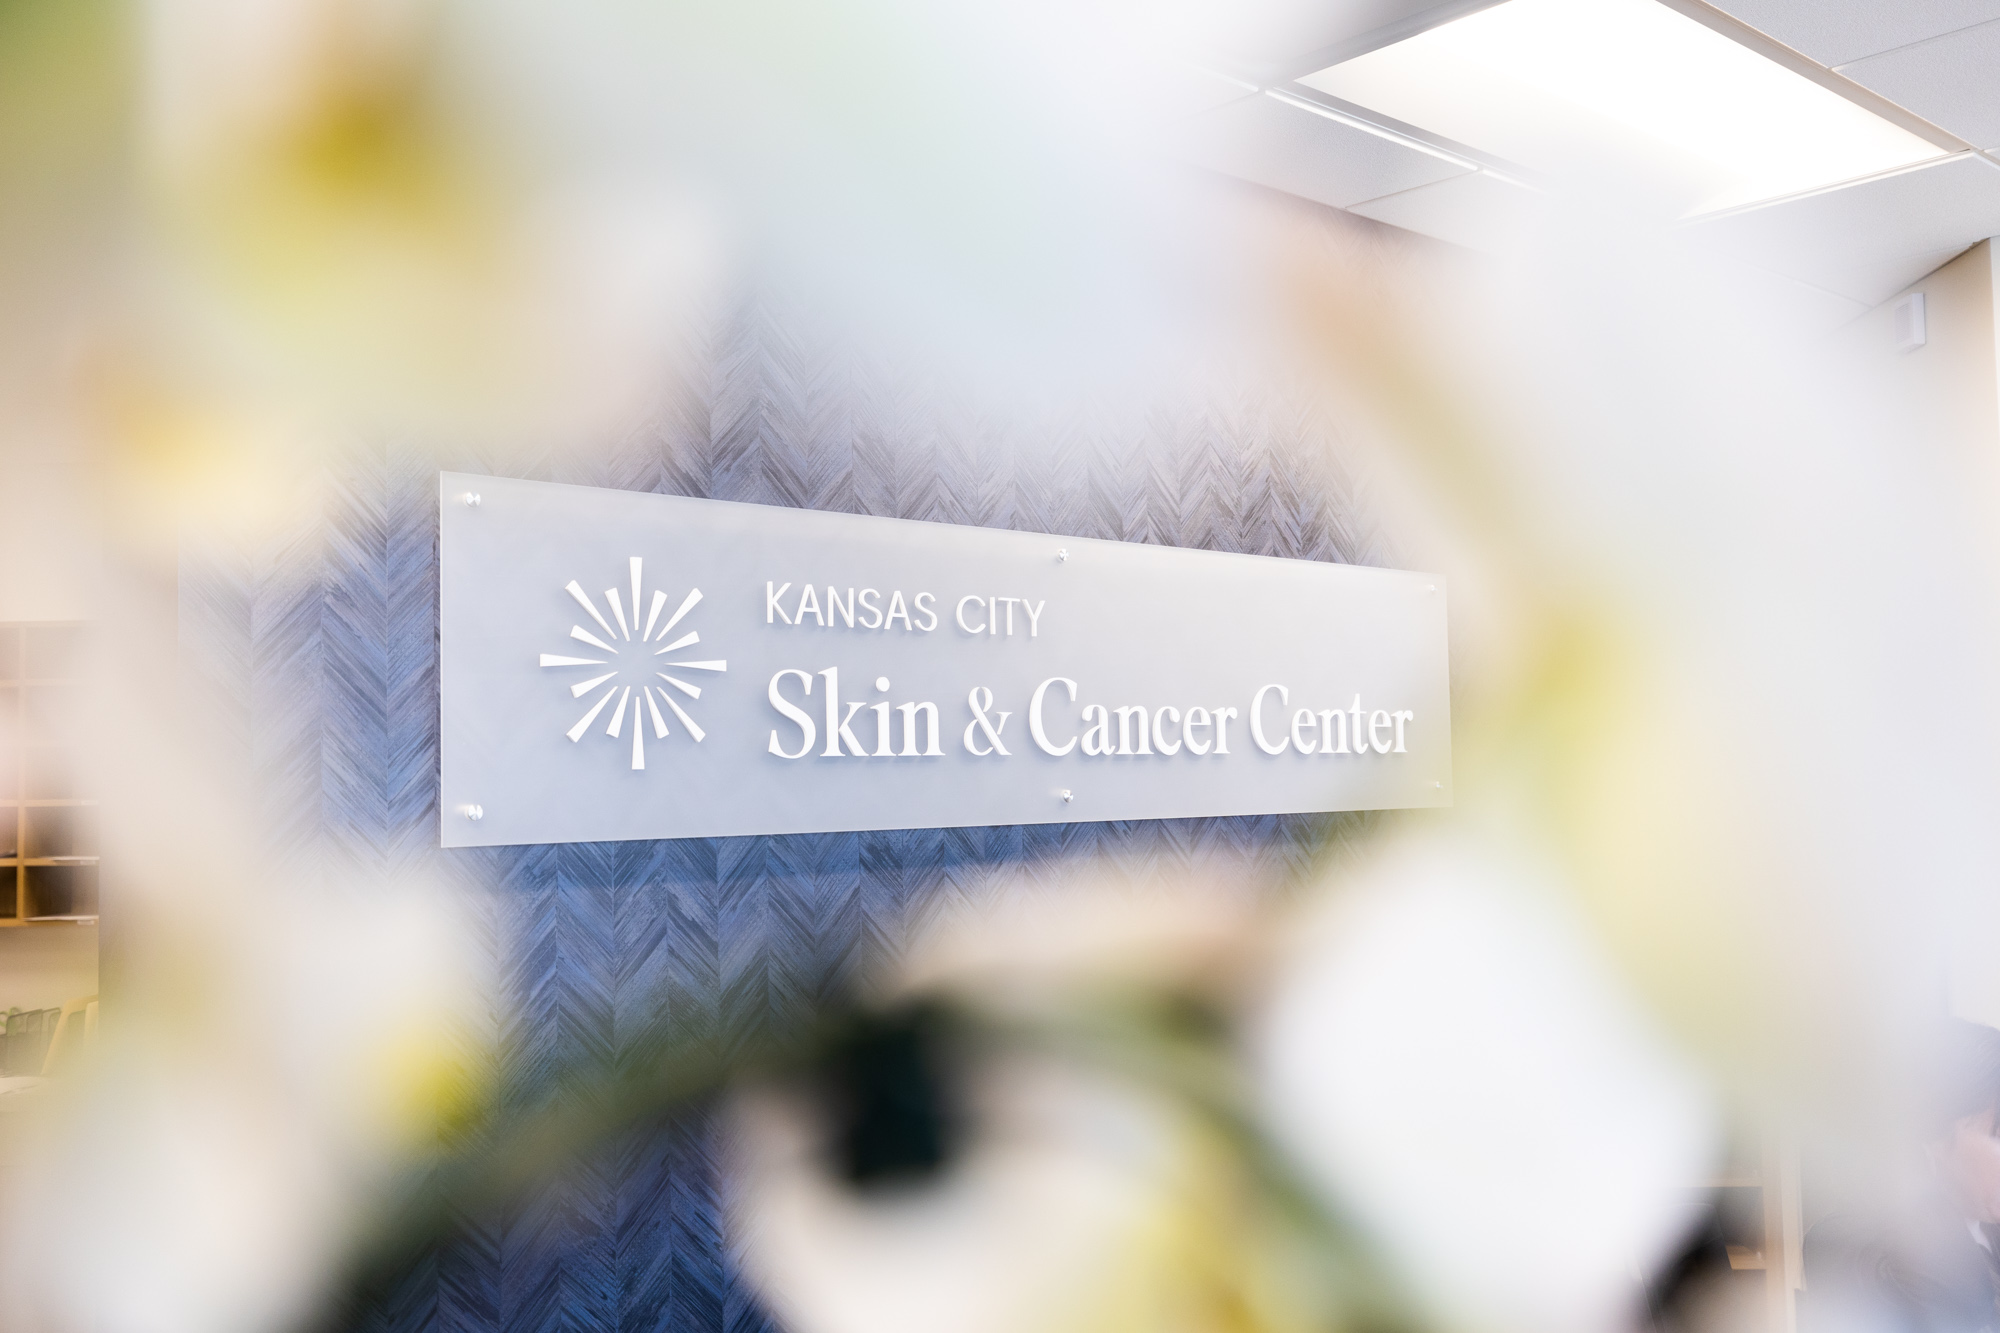 Most of the image is out of focus, but in the middle a sign that says Kansas City Skin and Cancer Center is clear.